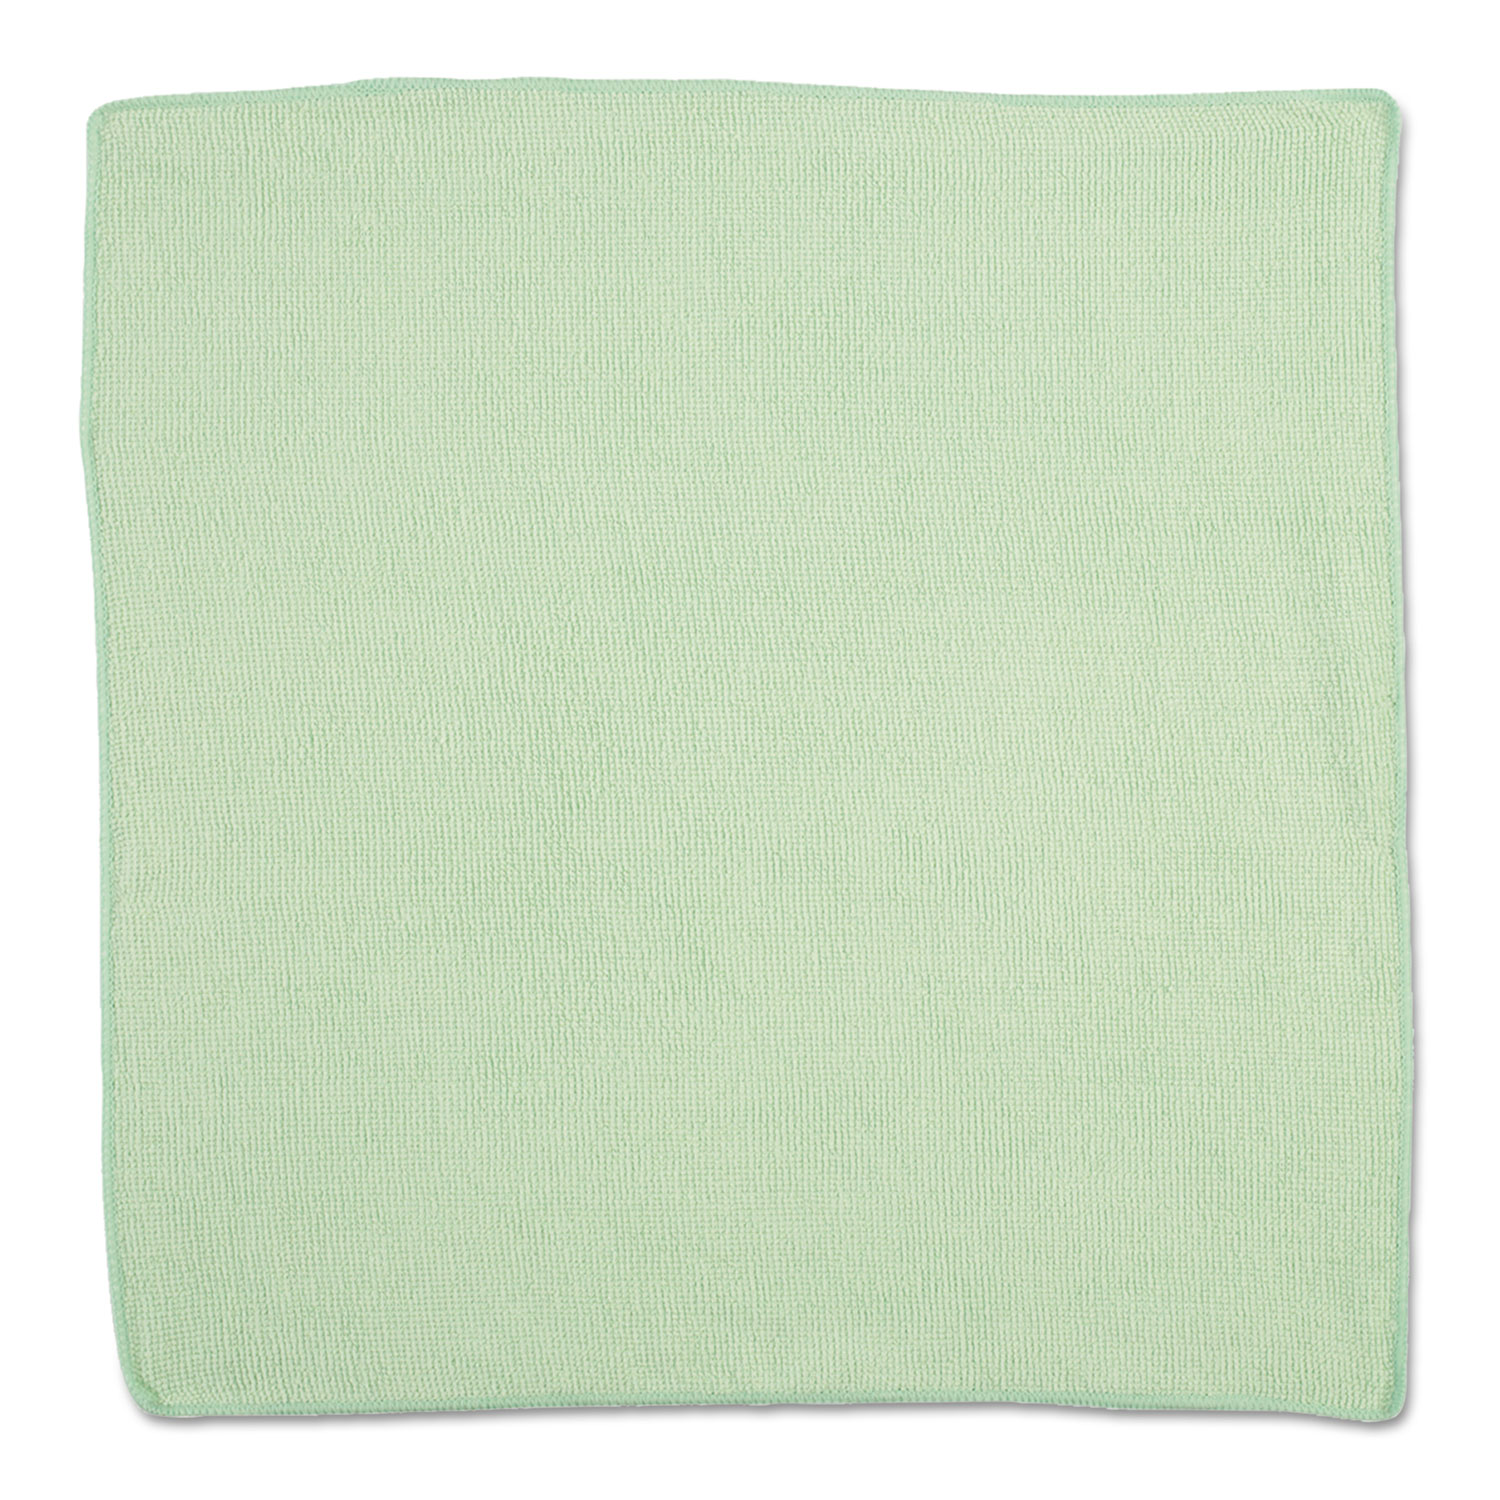  Rubbermaid Commercial 1820582 Microfiber Cleaning Cloths, 16 X 16, Green, 24/Pack (RCP1820582) 